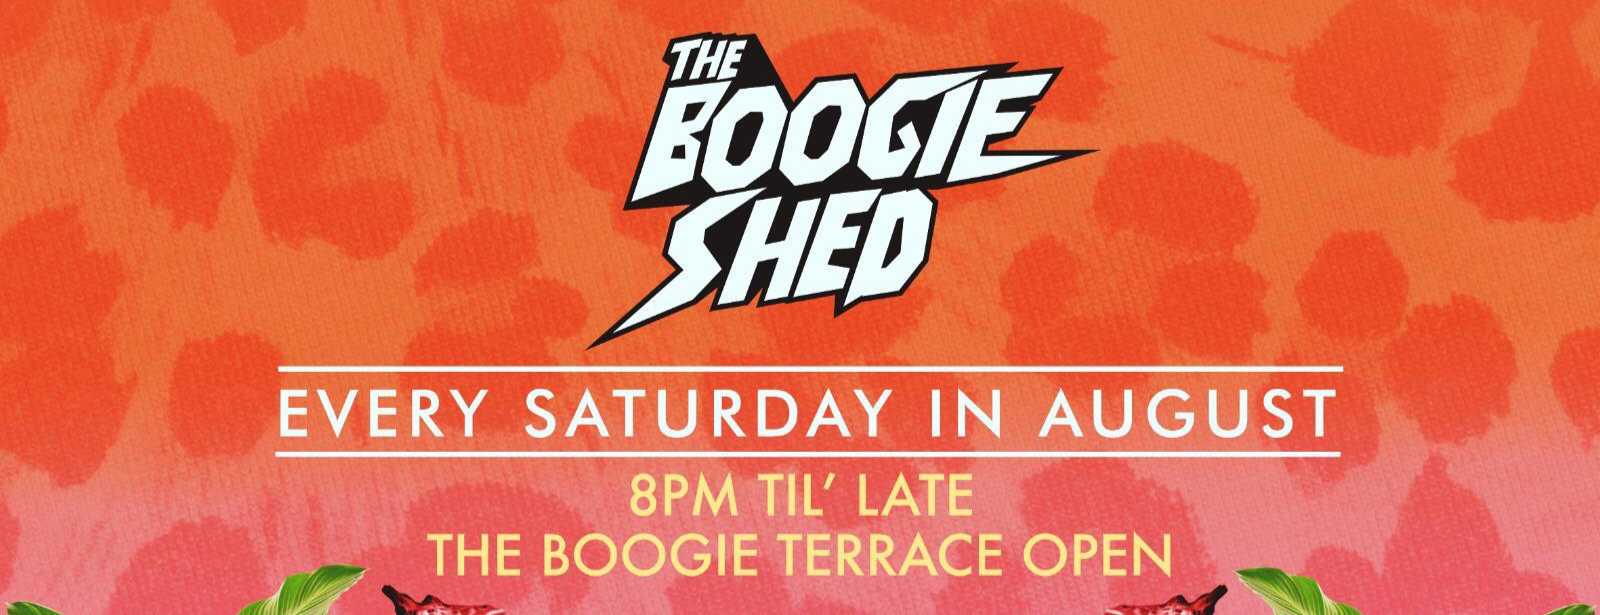 Saturdays at The Boogie Shed